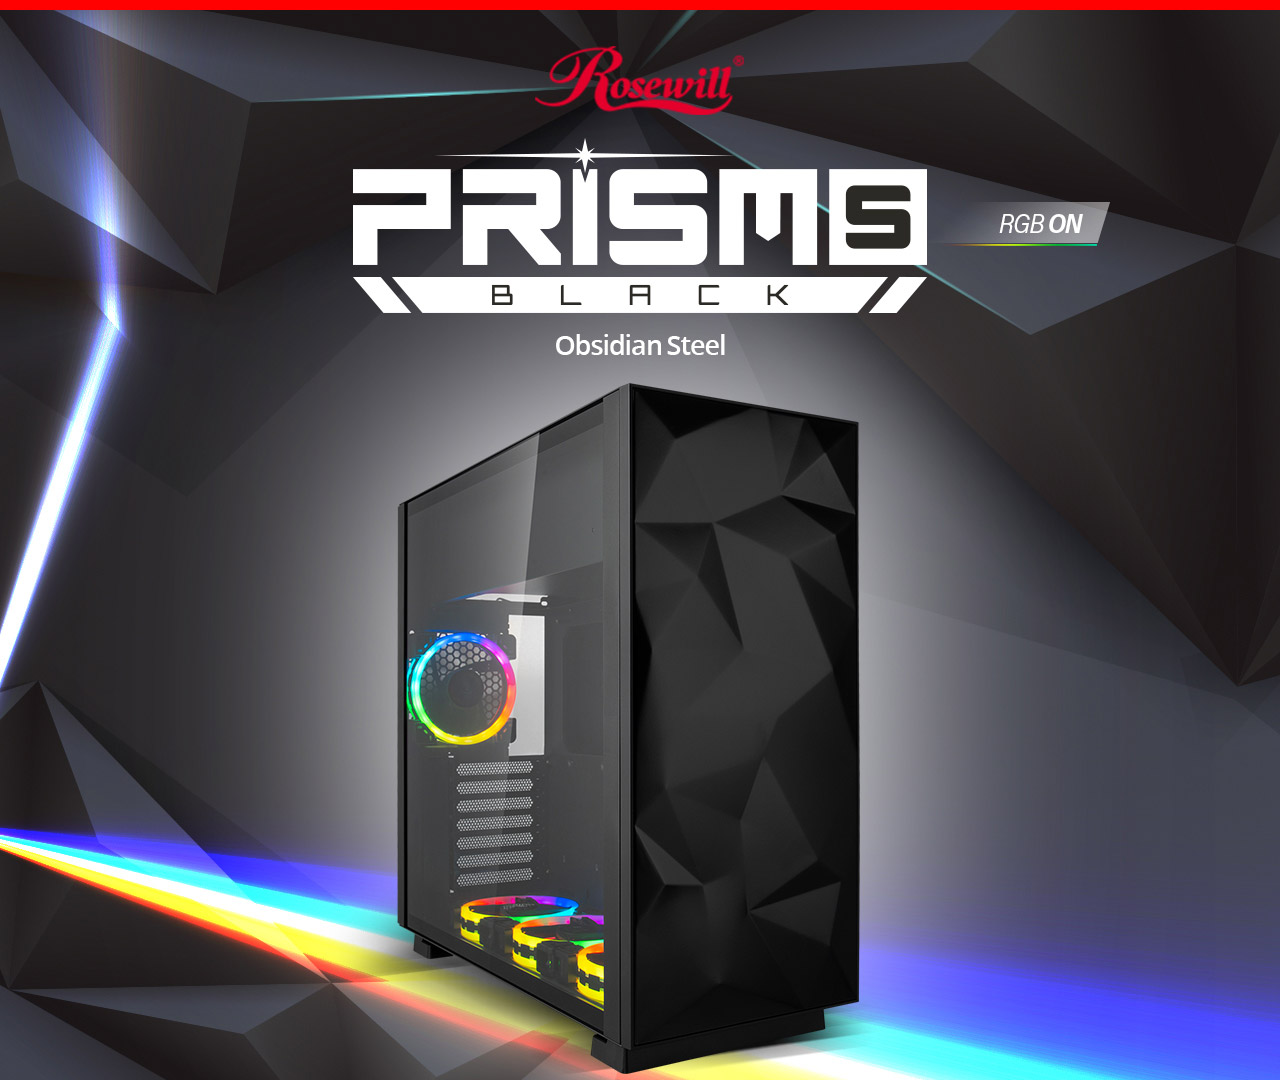 Rosewill ATX Mid Tower Gaming PC Computer Case with RGB Angled to the Right with Graphics and Text Indicating: Rosewill PRISM S RGB ON BLACK Obsidian Steel